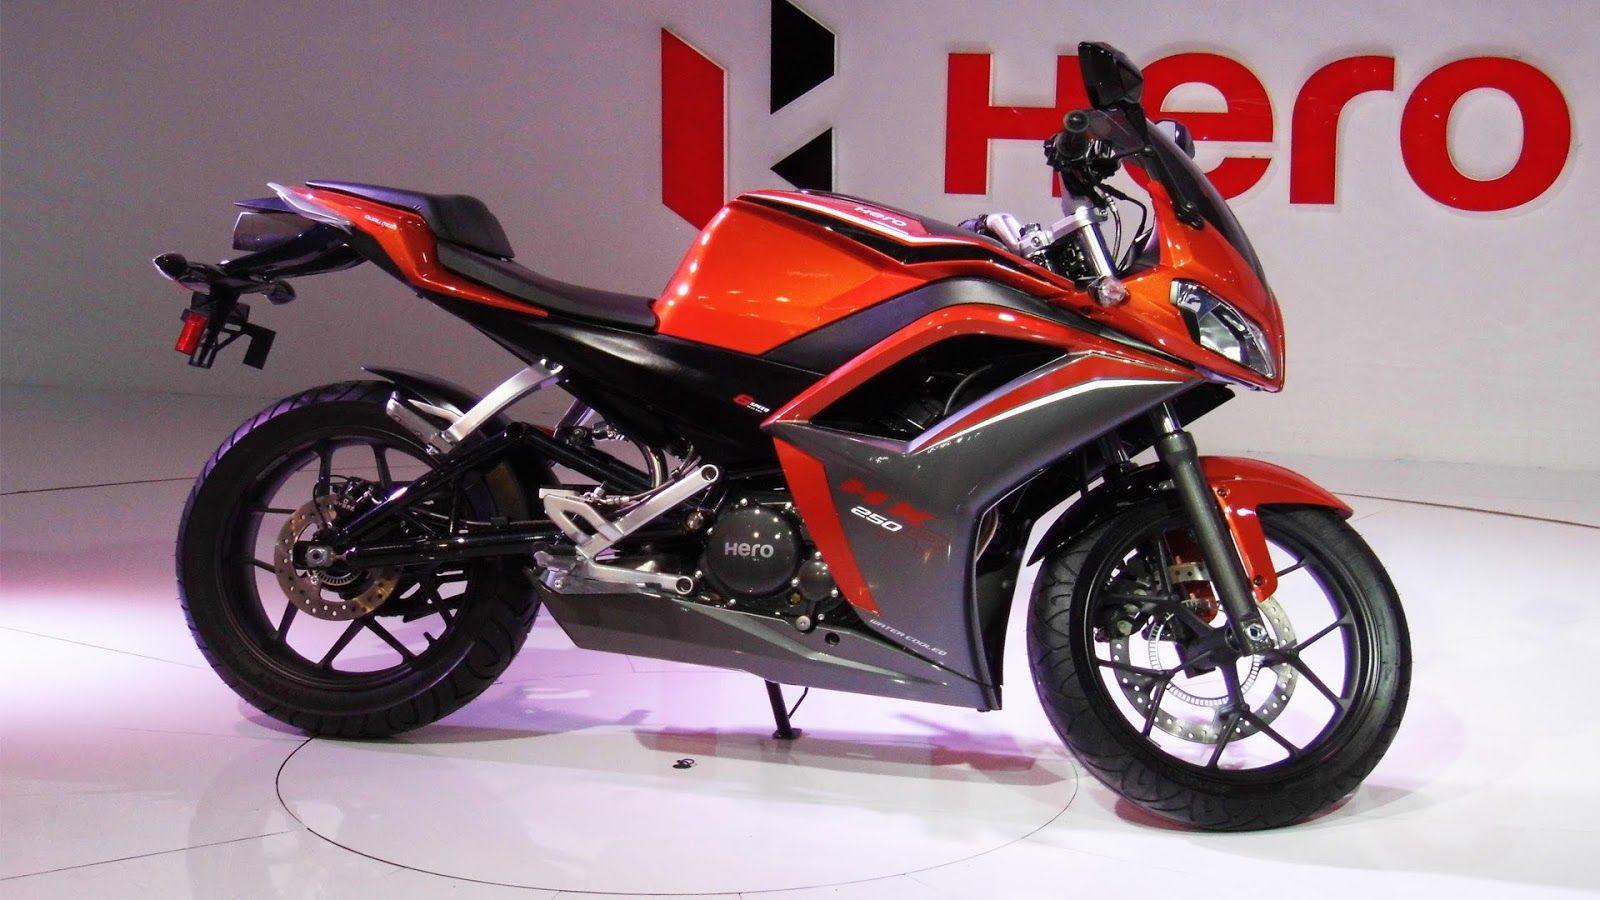 HD Image for 2016 Hero HX250R Latest New & Old Car HD Image